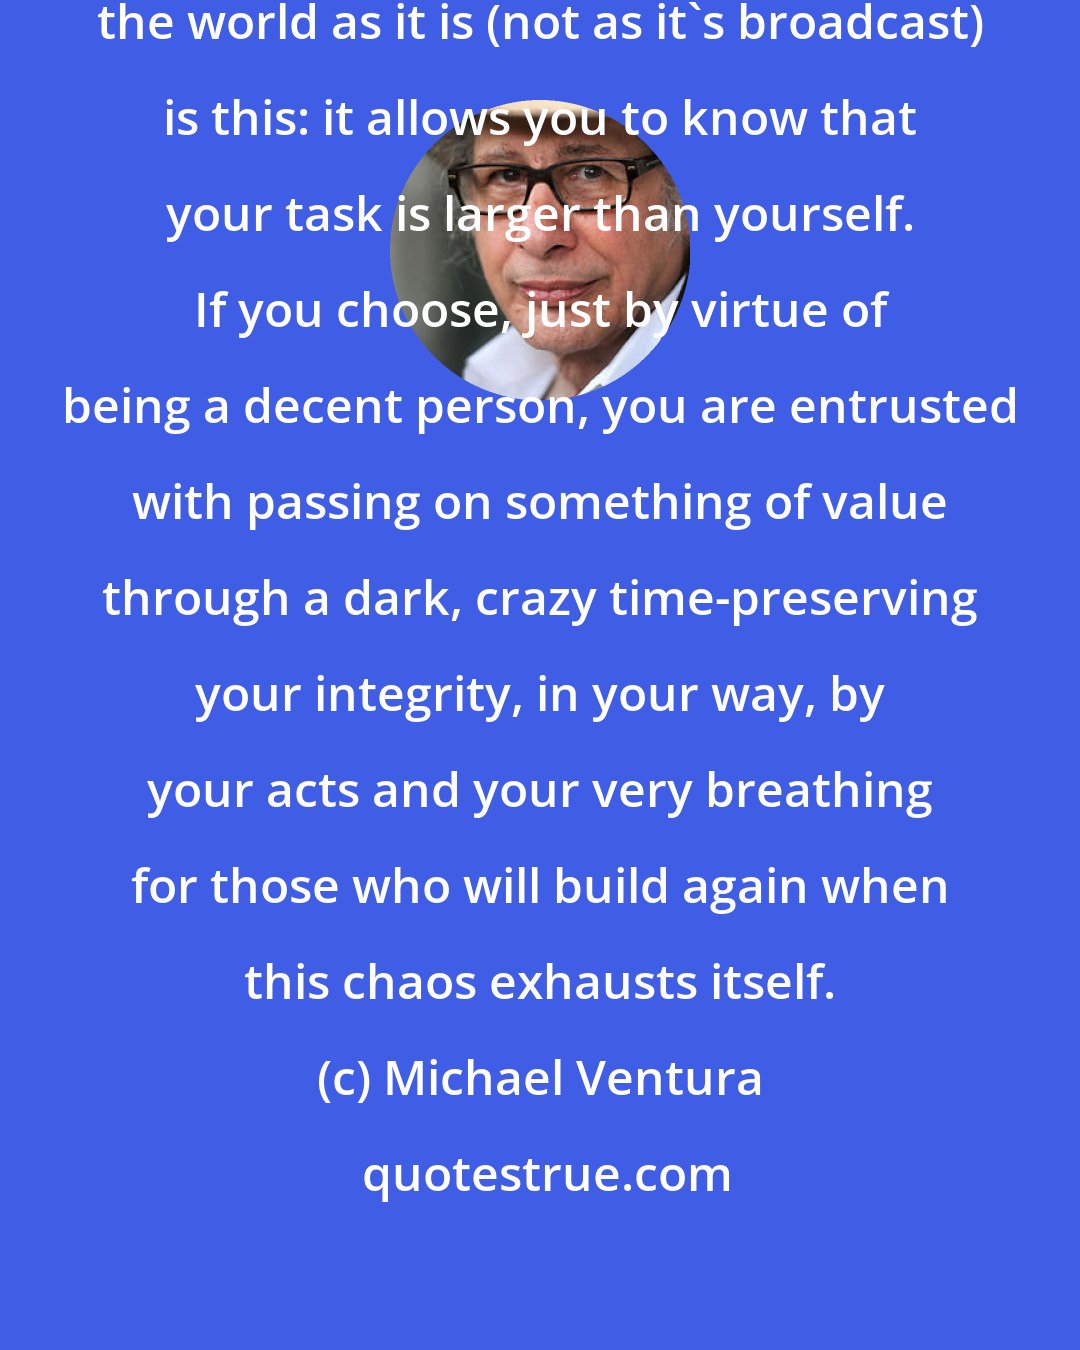 Michael Ventura: The value of having an inner map of the world as it is (not as it's broadcast) is this: it allows you to know that your task is larger than yourself. If you choose, just by virtue of being a decent person, you are entrusted with passing on something of value through a dark, crazy time-preserving your integrity, in your way, by your acts and your very breathing for those who will build again when this chaos exhausts itself.